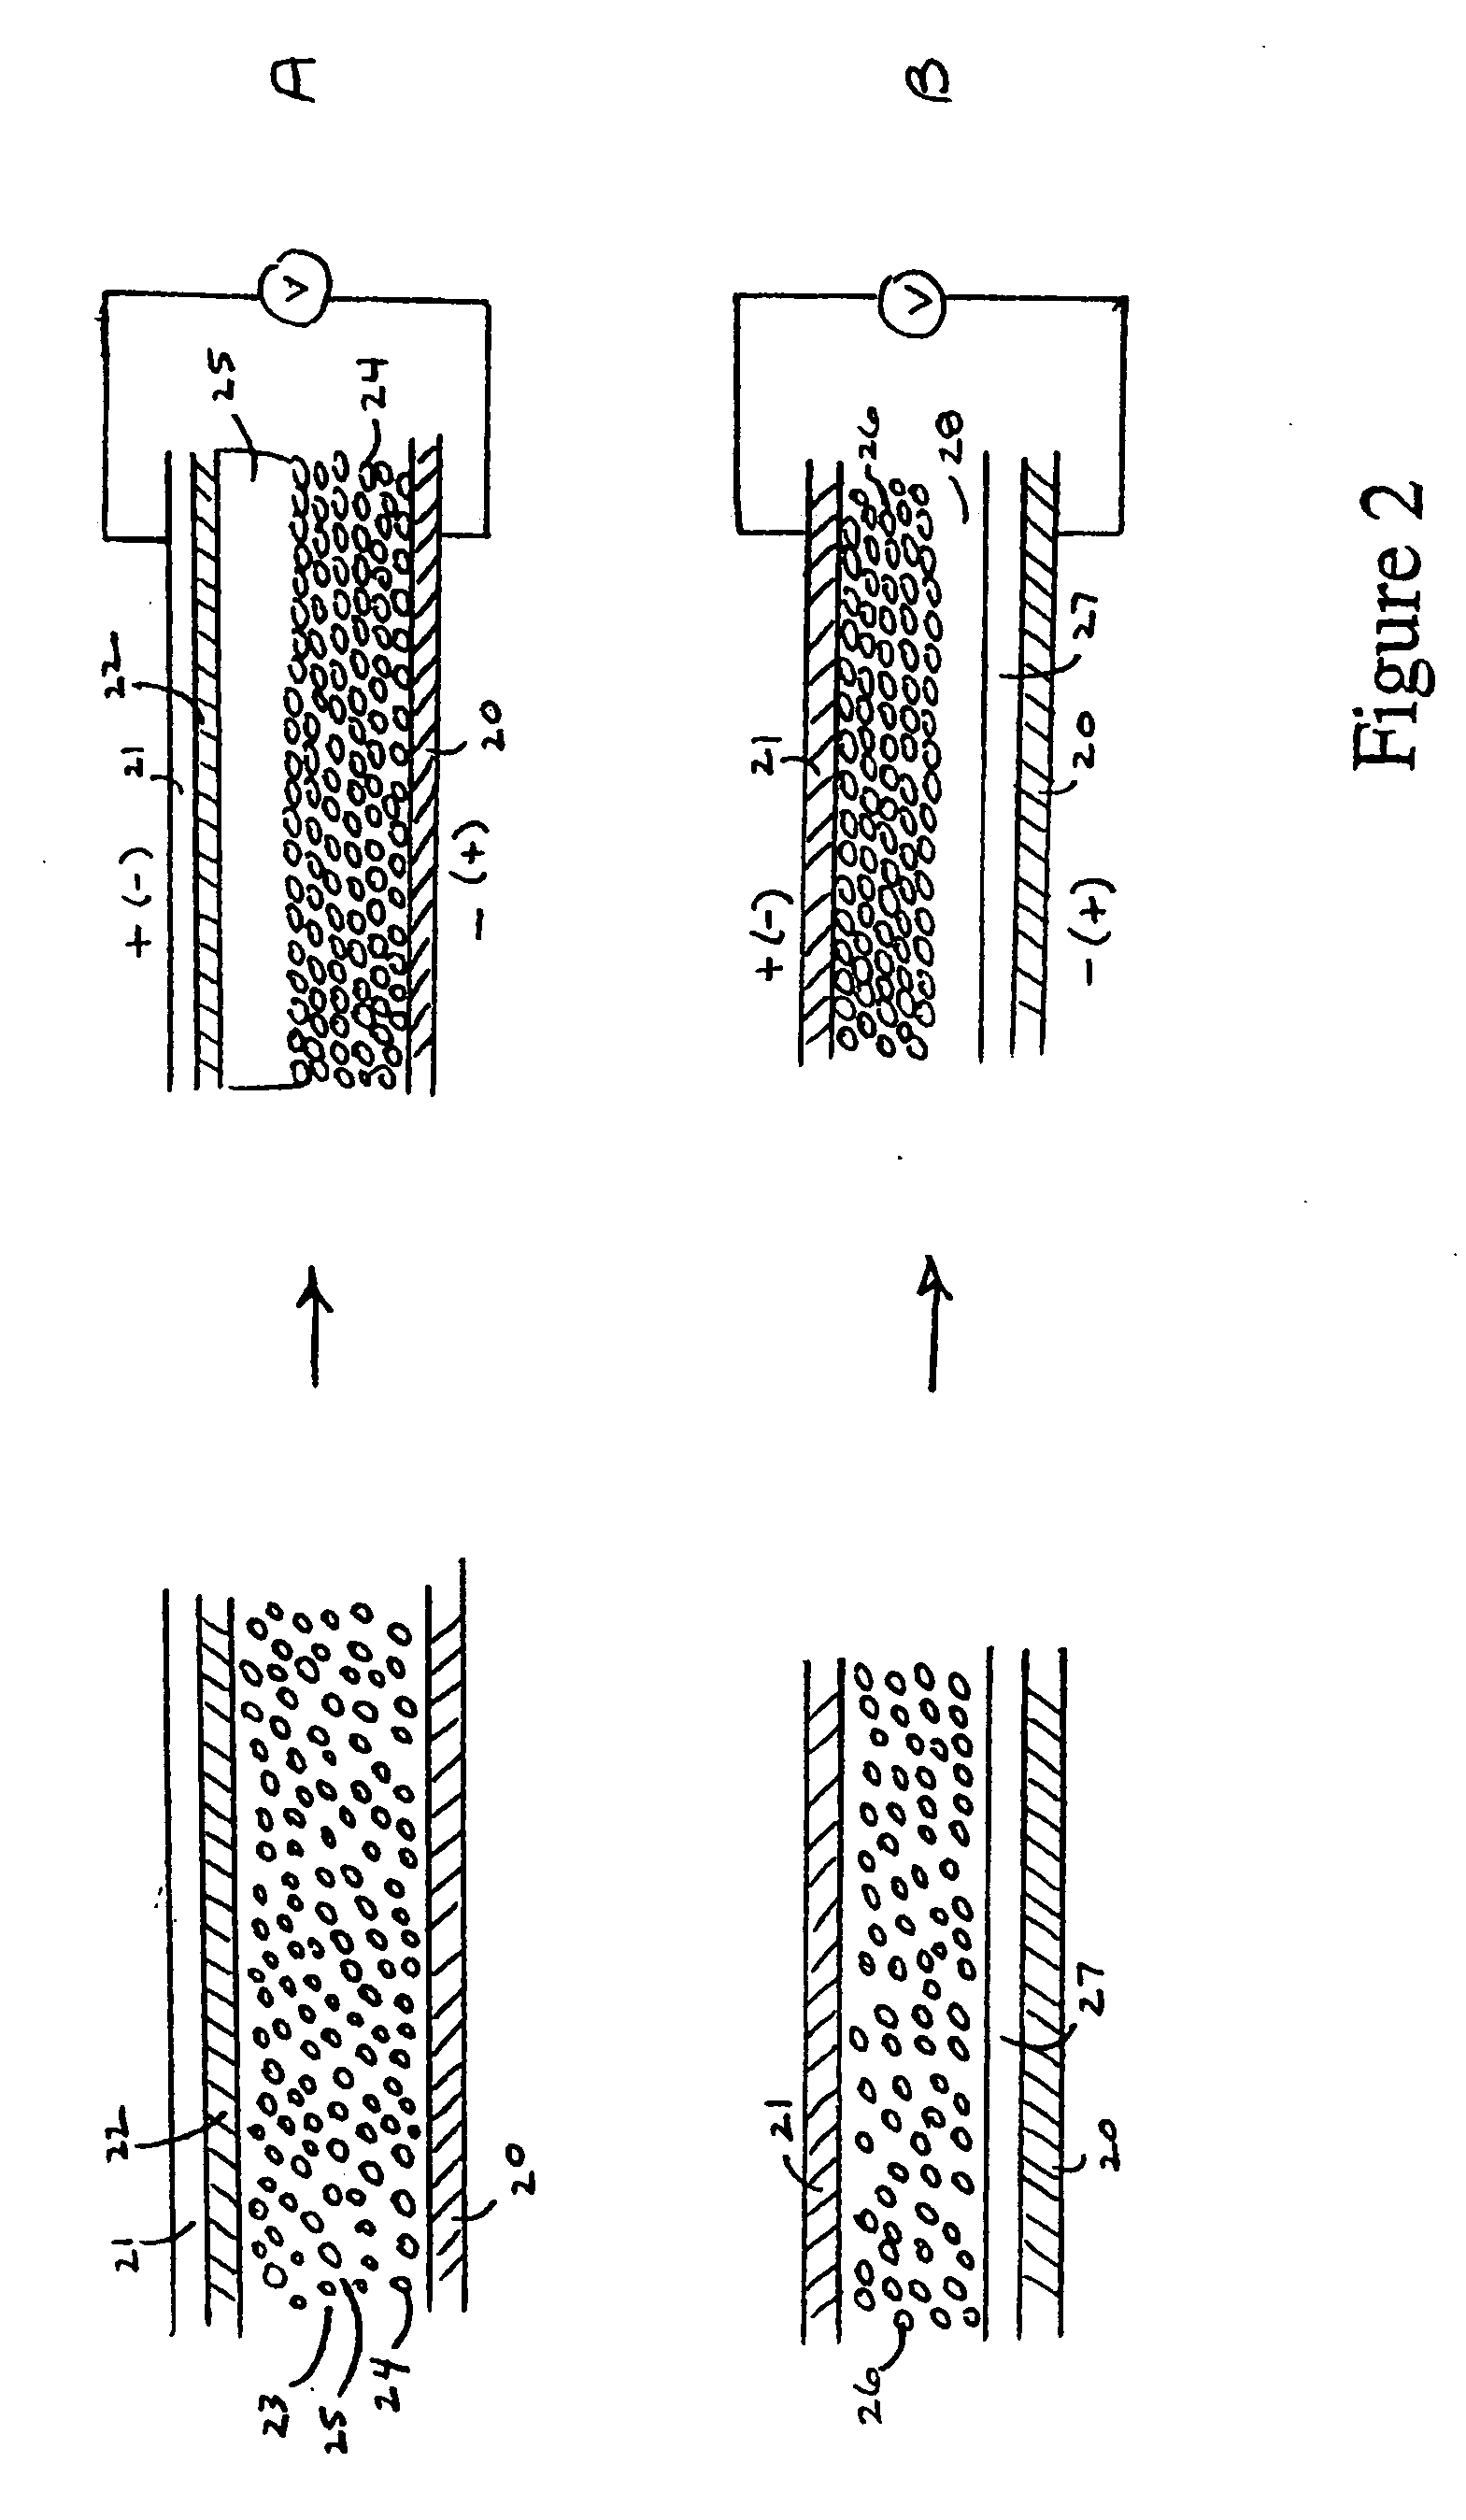 Electrophoretic assembly of electrochemical devices